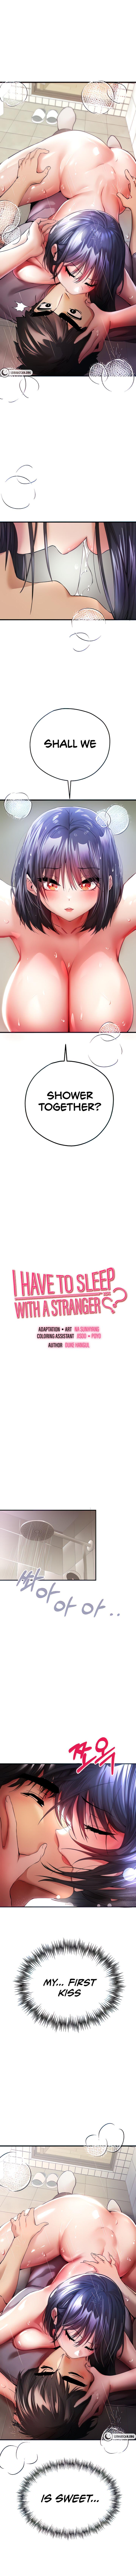 I Have To Sleep With A Stranger? 196